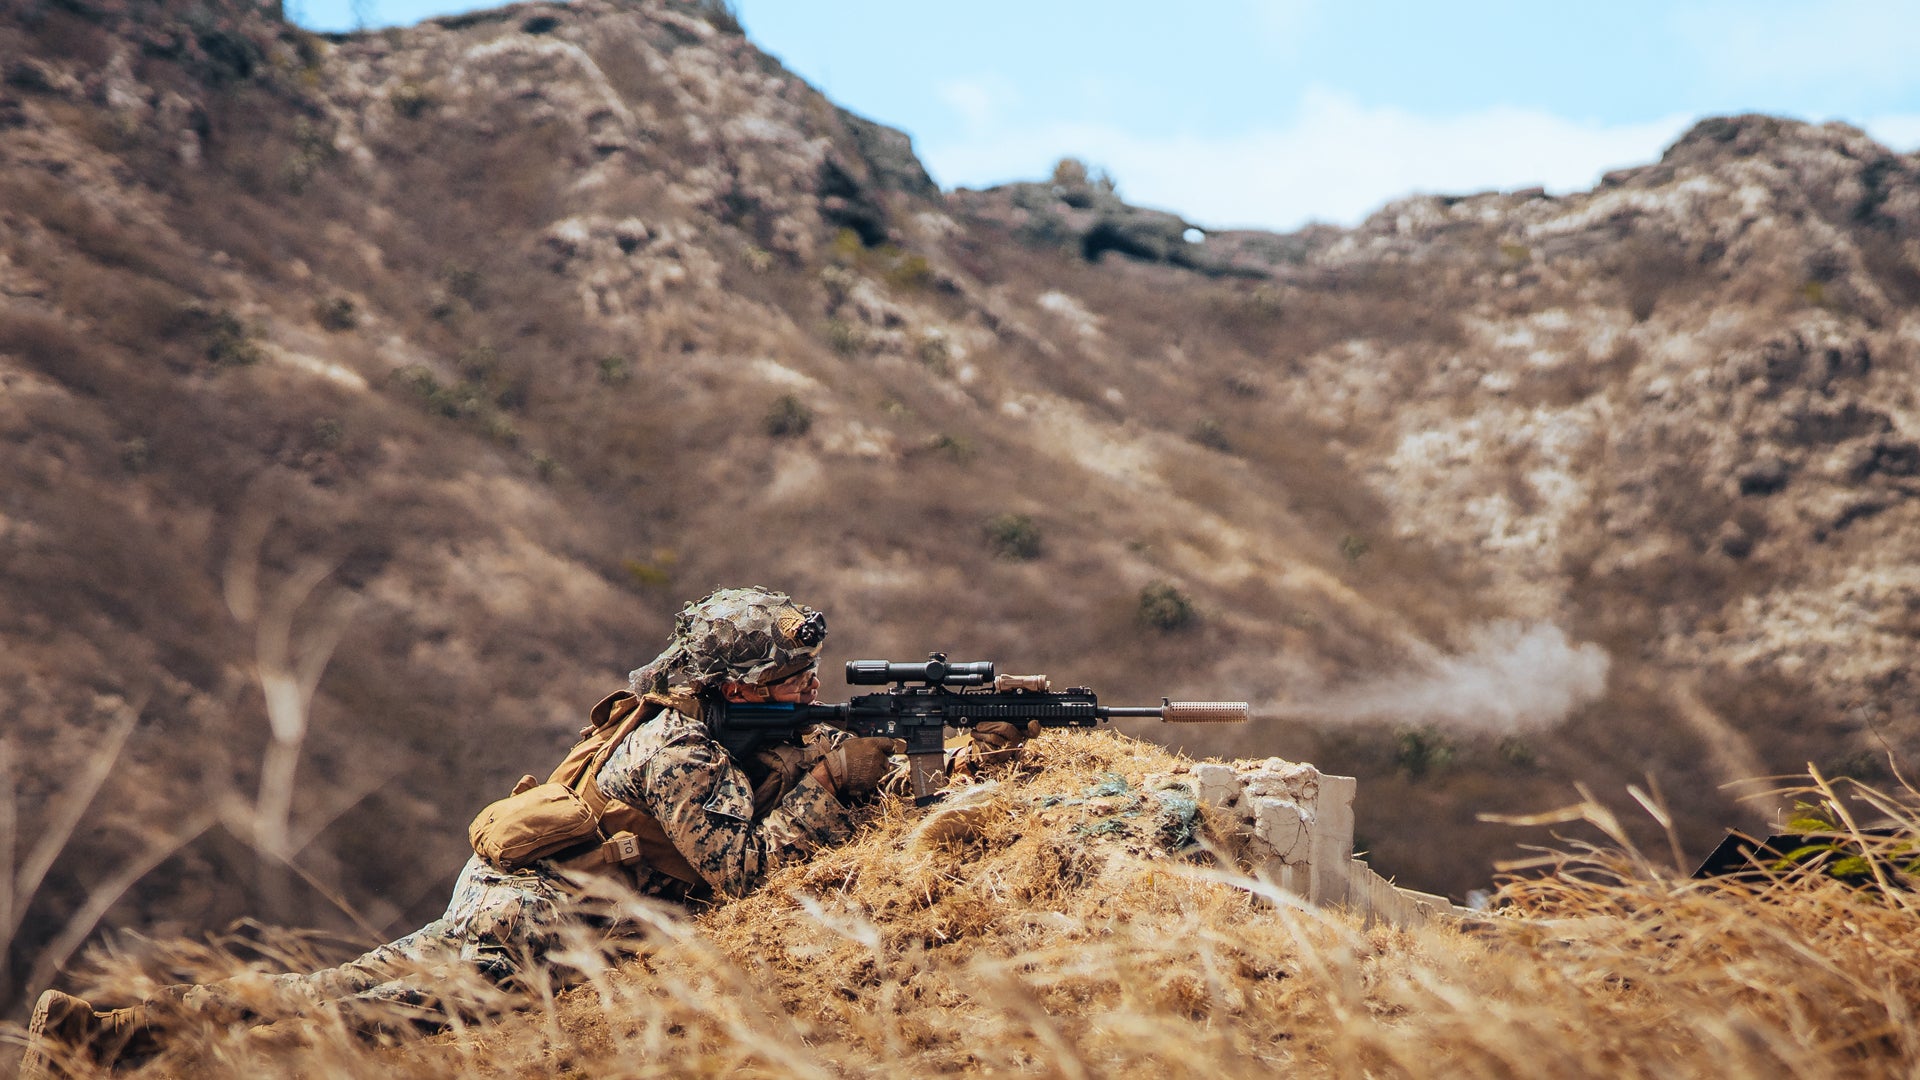 The Marine Corps’ new littoral combat team is changing the Marine rifle squad